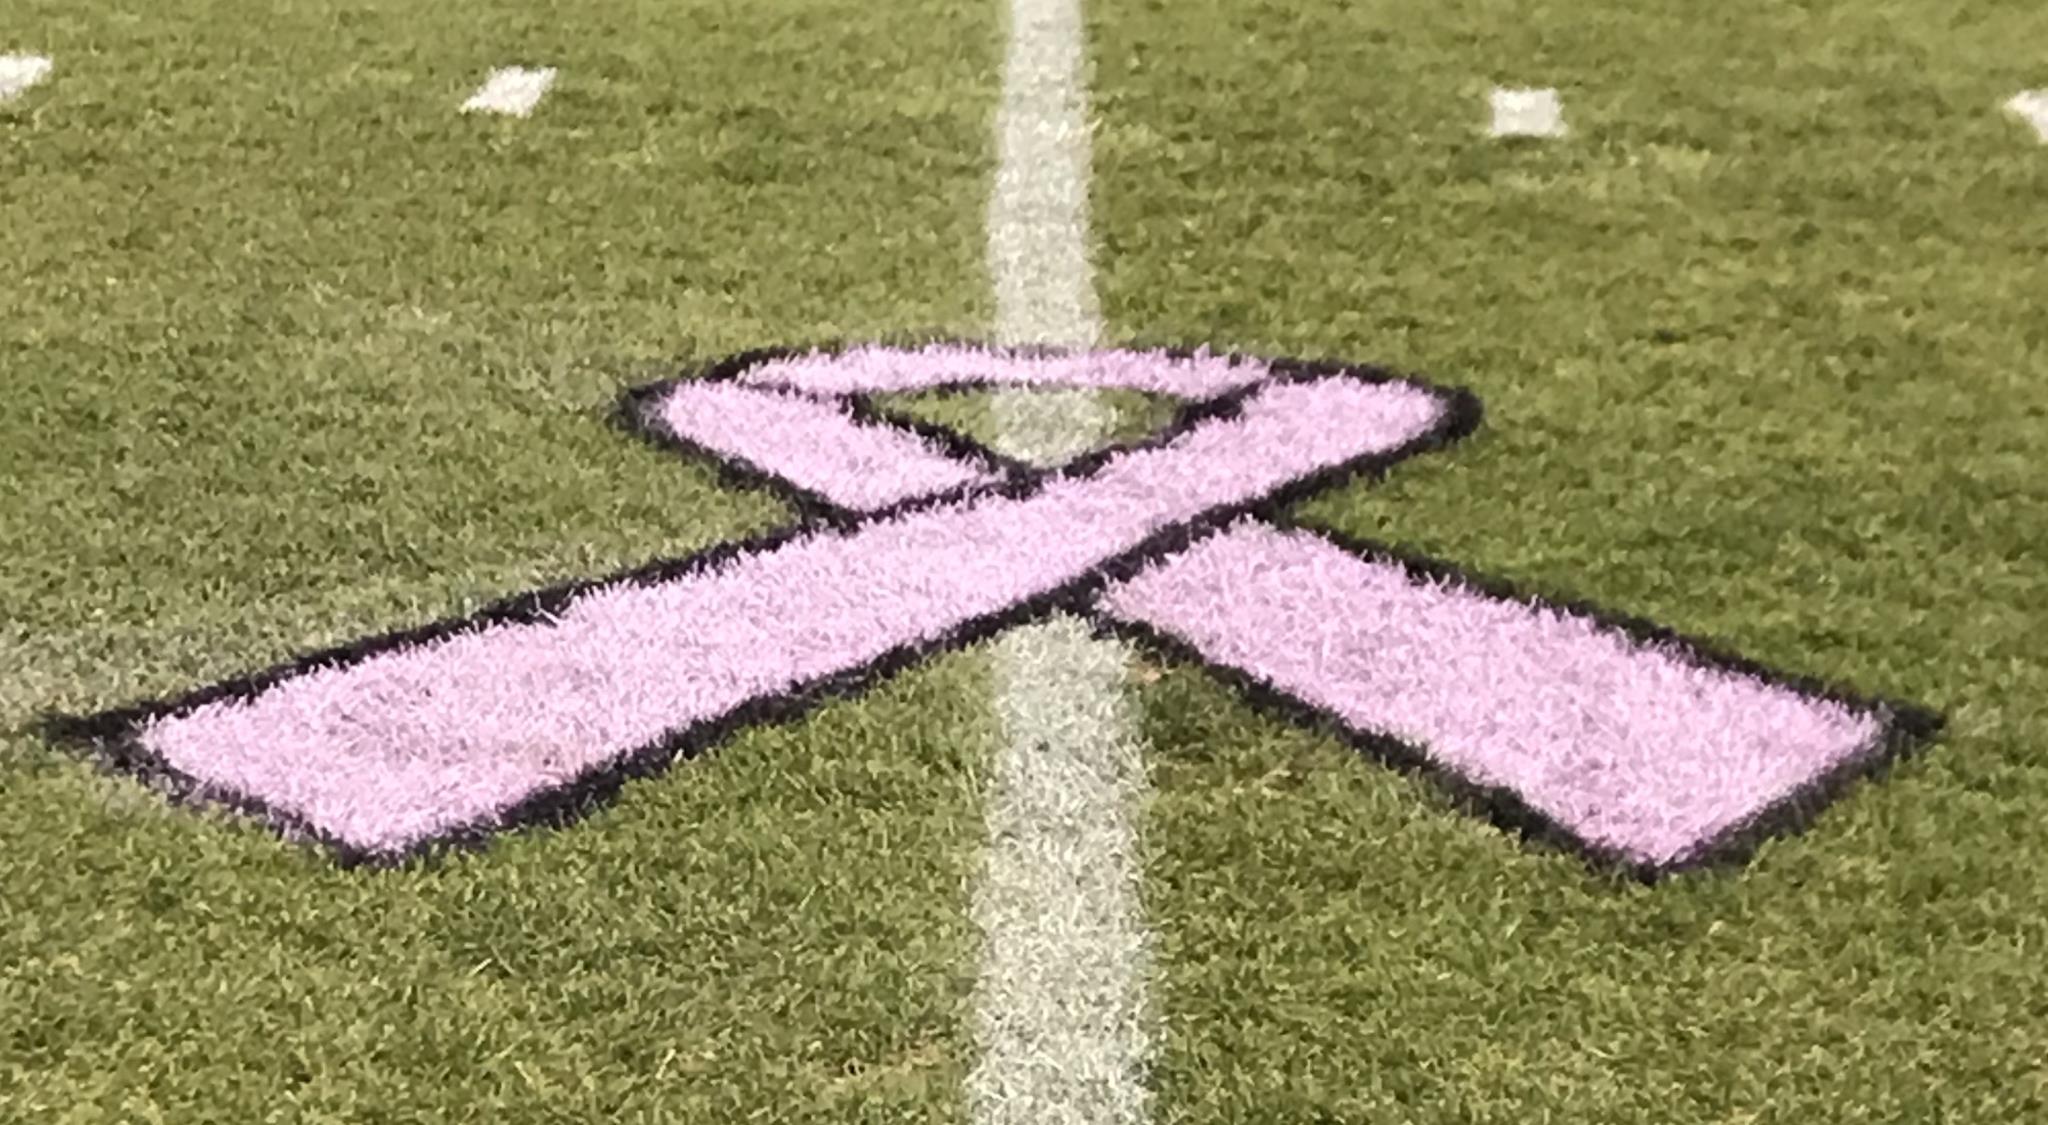 Pink breast cancer ribbon painted on the football field